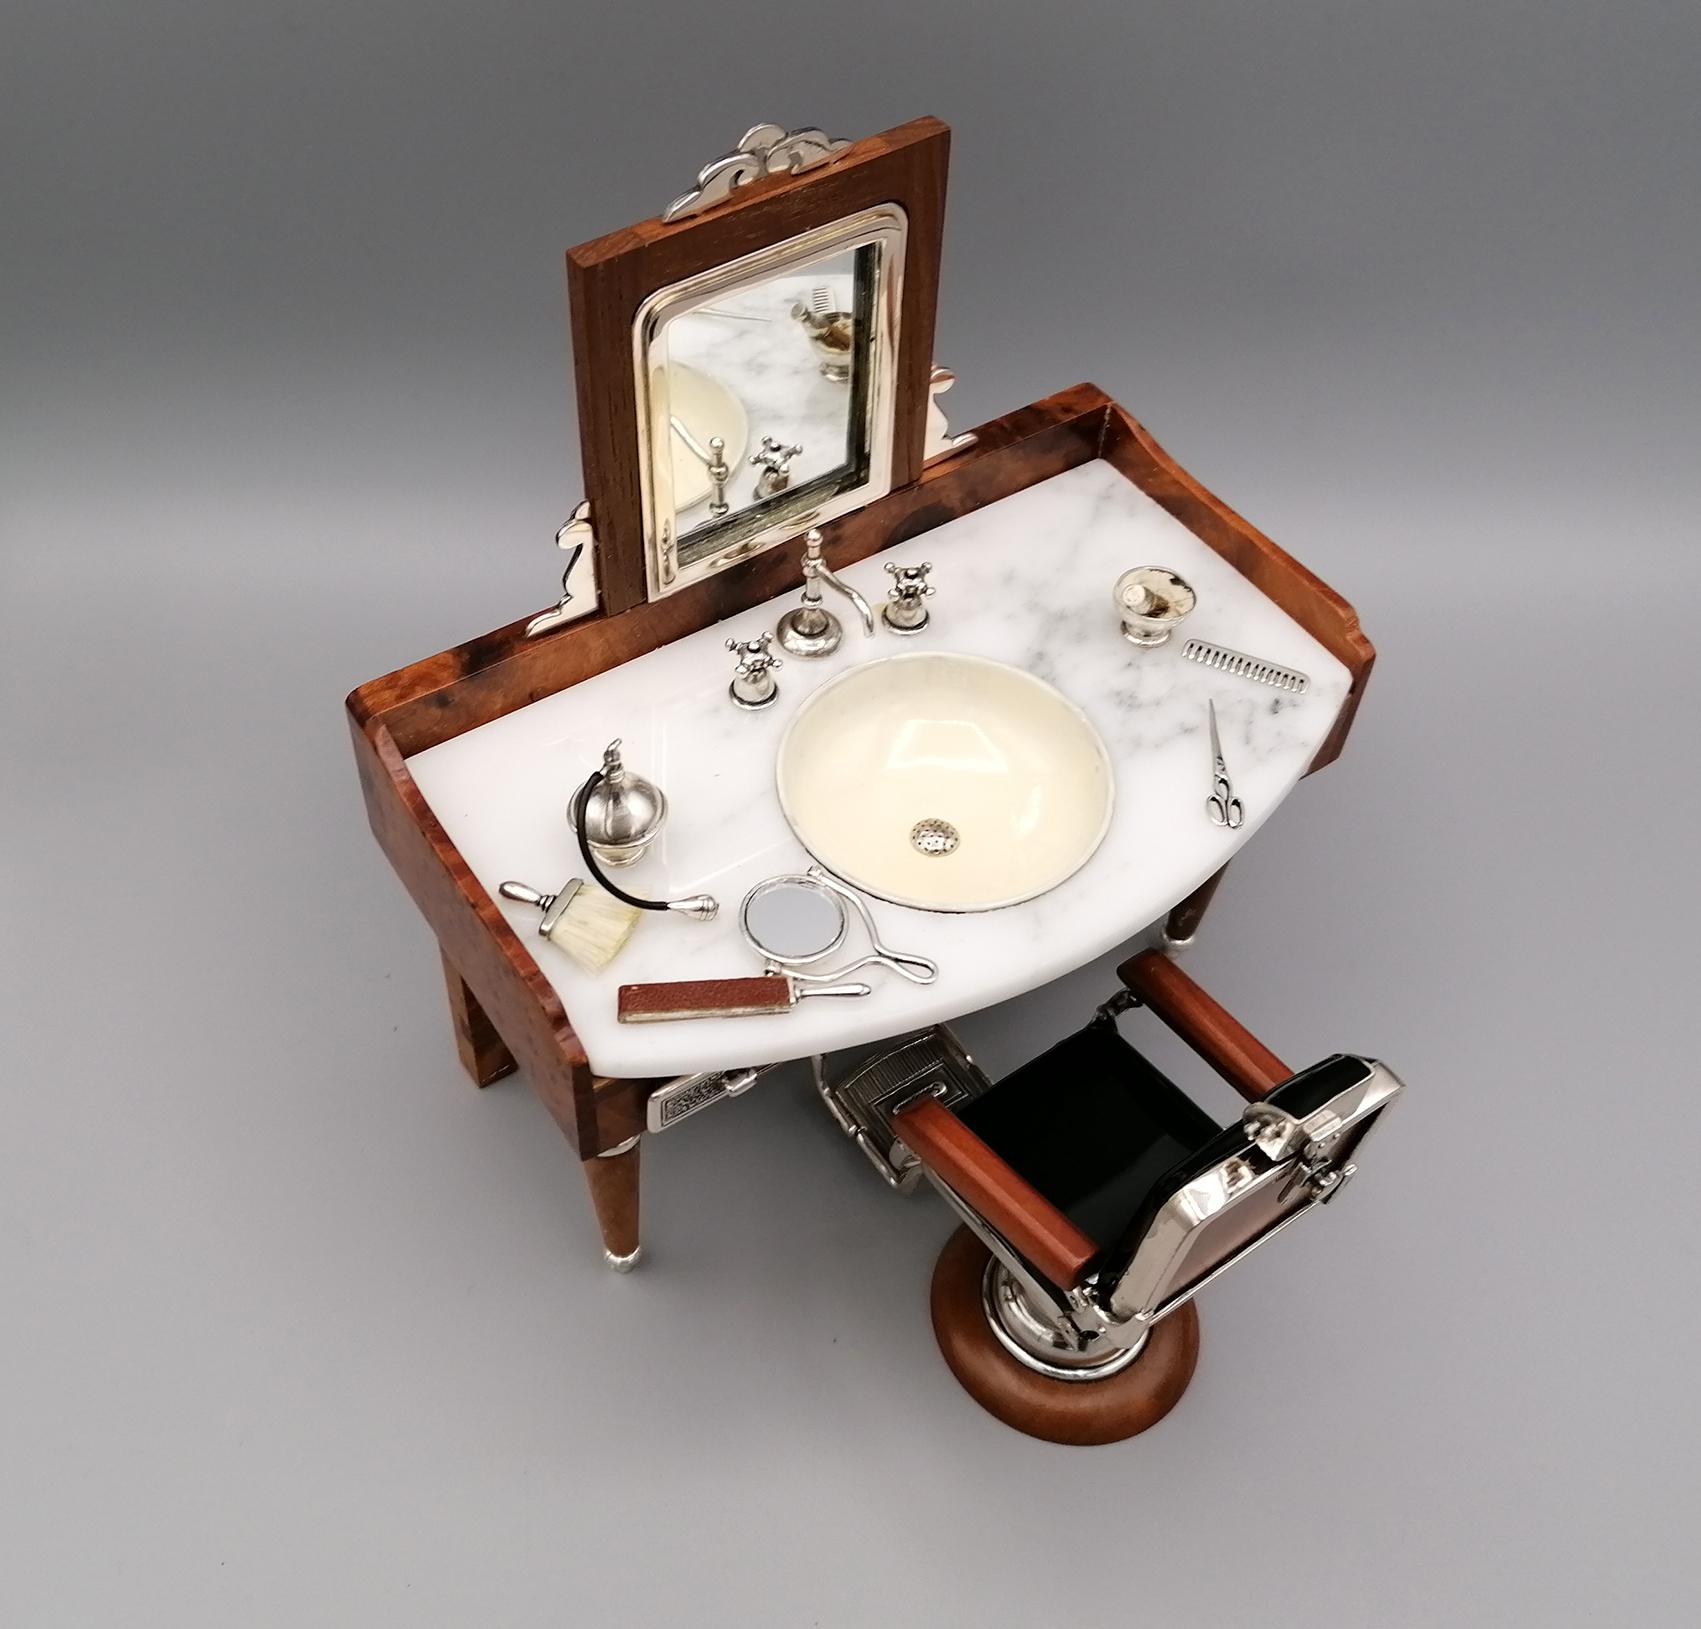 Extraordinary miniature representing the barber shop. The structure is in briar and the details (comb, brush, mirror, taps, scissors, etc.) are in 925 silver.
The tabletop is in Carrara marble.
The chair and washbasin are in enameled 925 silver.
The